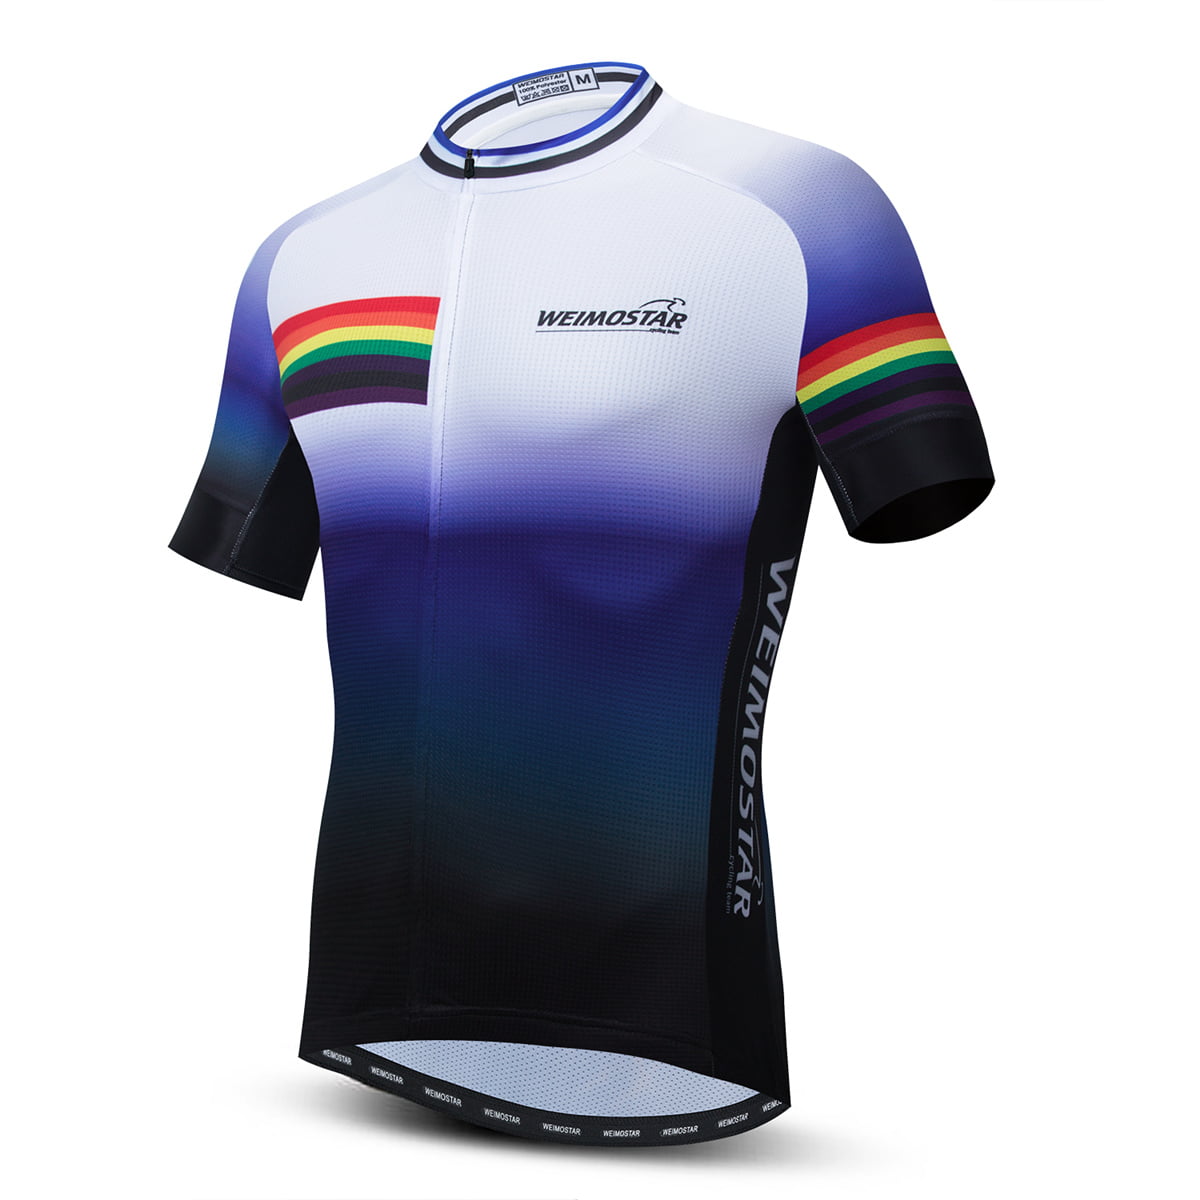 Weimostar Cycling Jersey Cycling Clothing Bicycle Shirt  Jersey Wear Suit S-3XL 